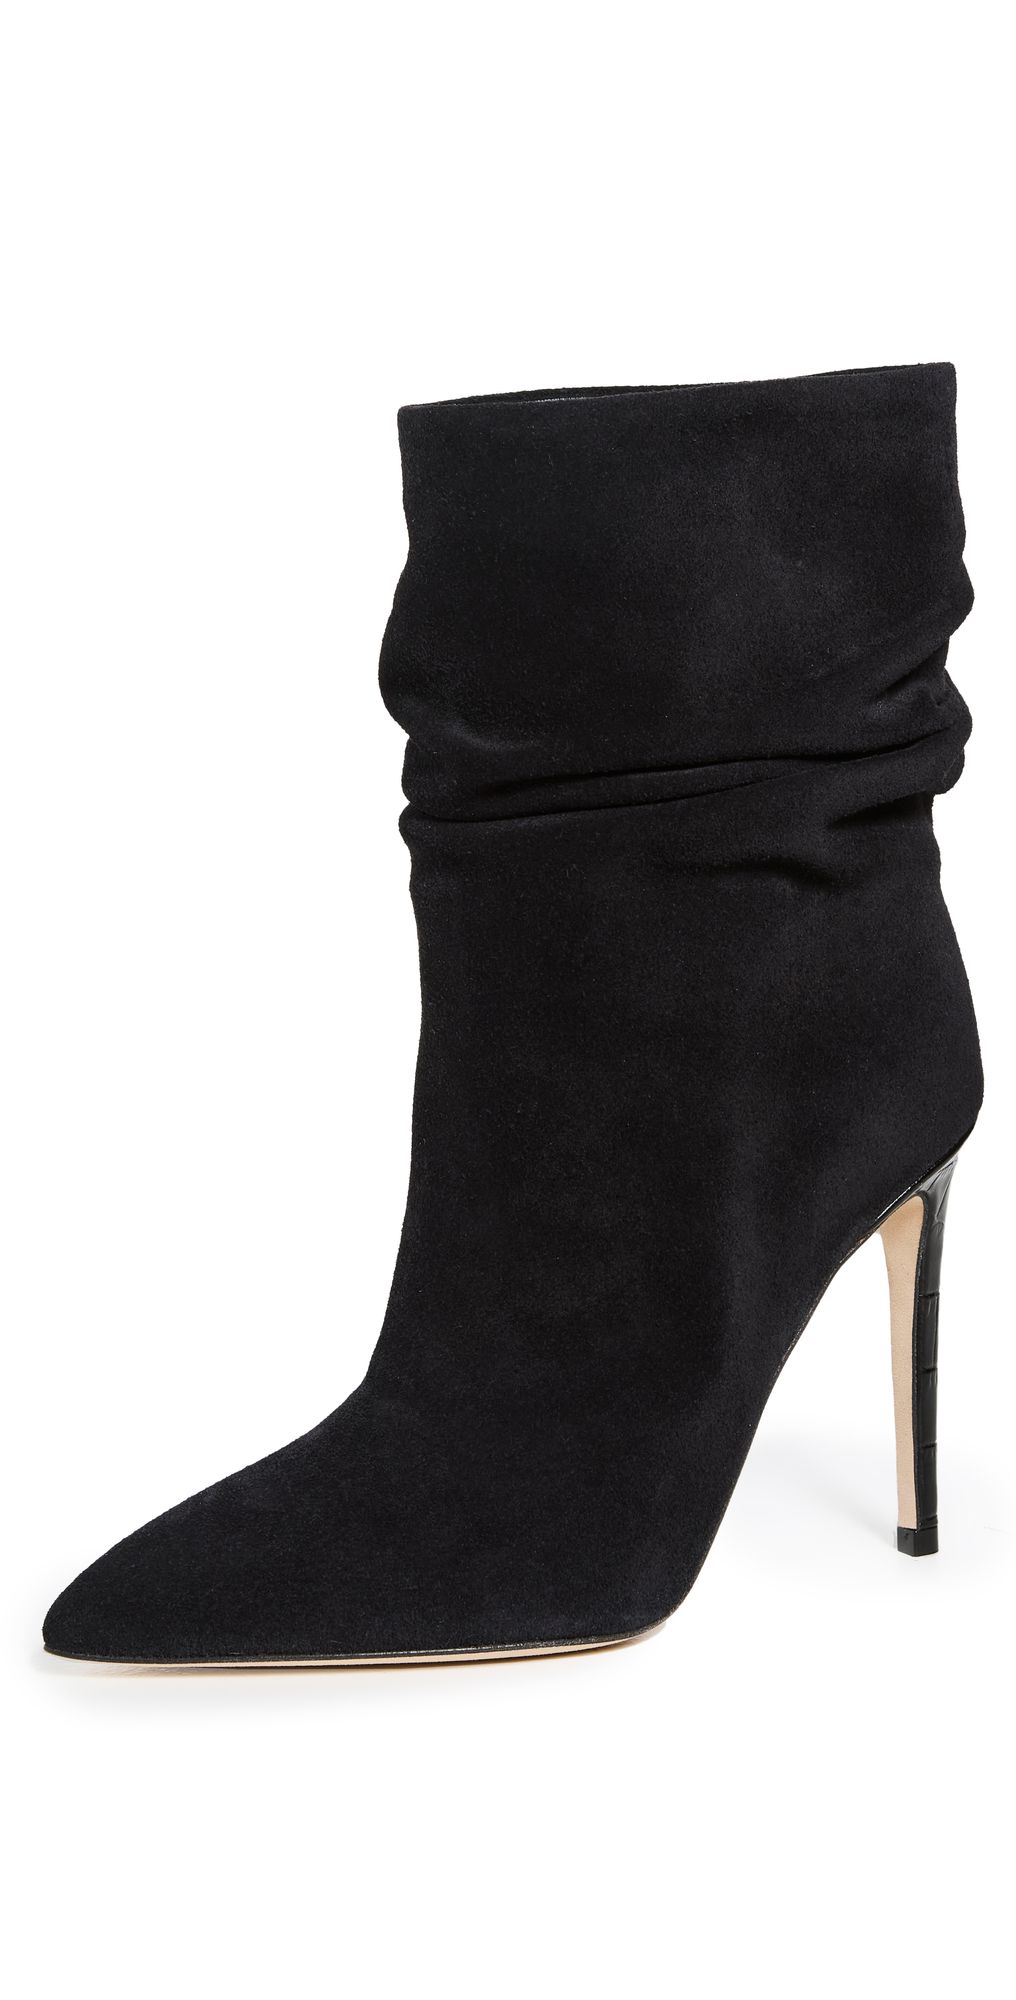 Stiletto Slouchy Ankle Boots | Shopbop